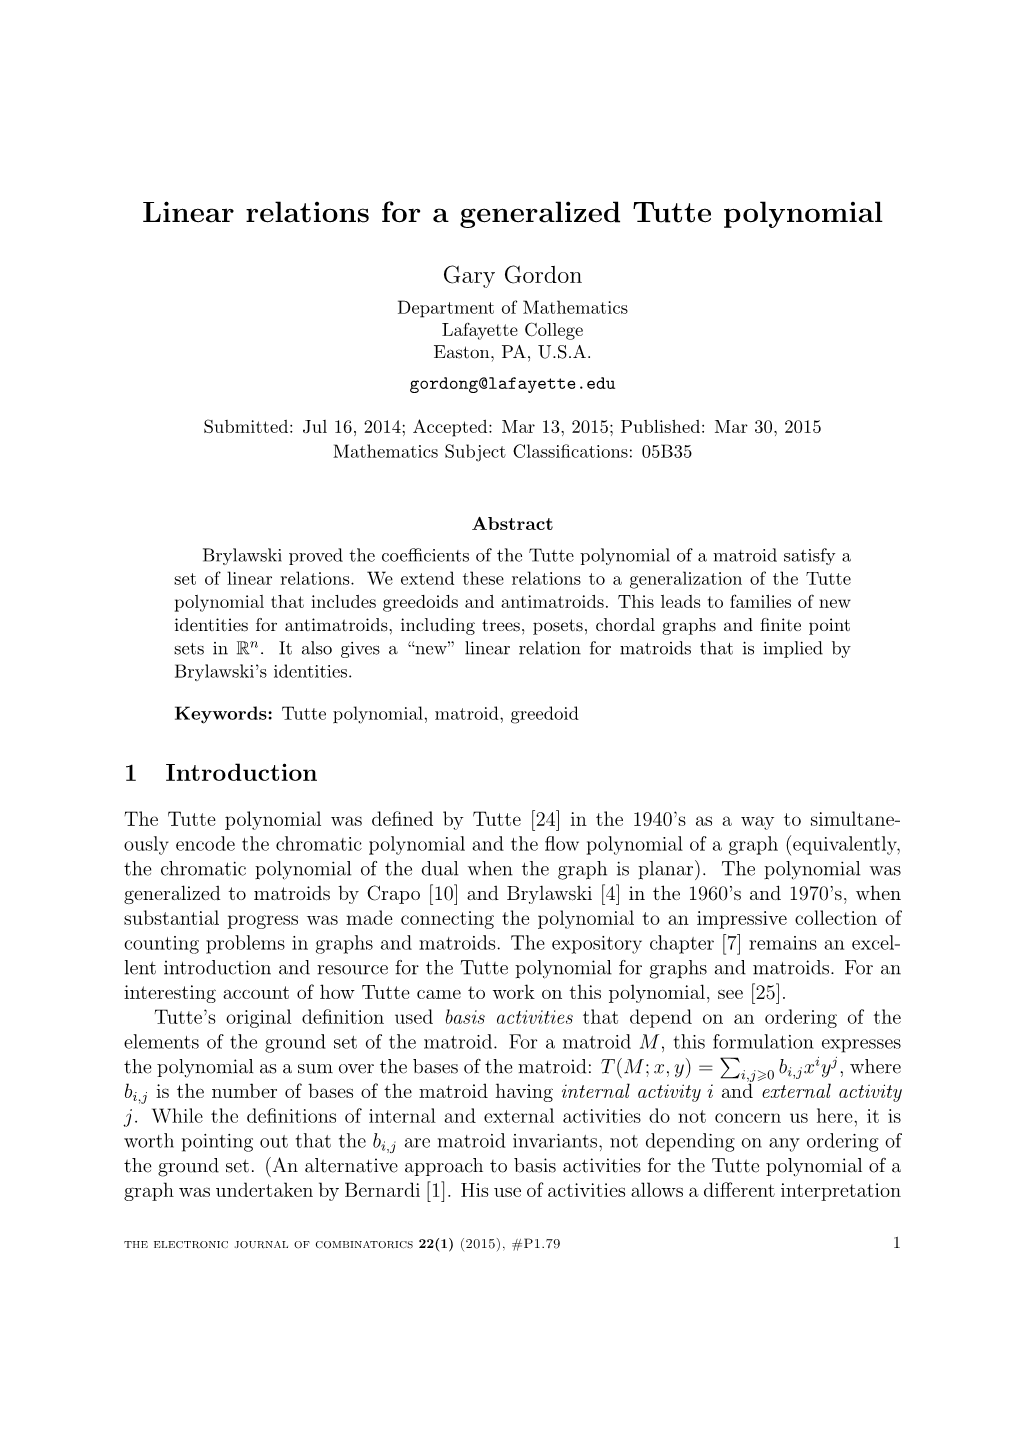 Linear Relations for a Generalized Tutte Polynomial